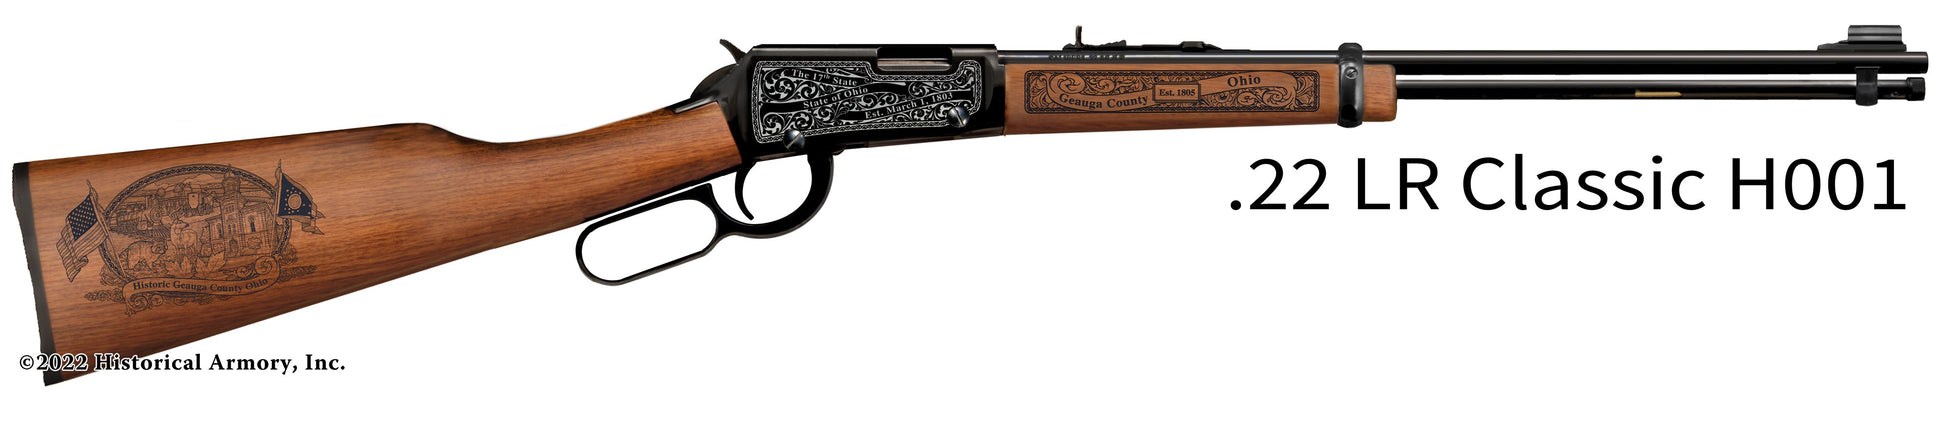 Geauga County Ohio Engraved Henry H001 Rifle